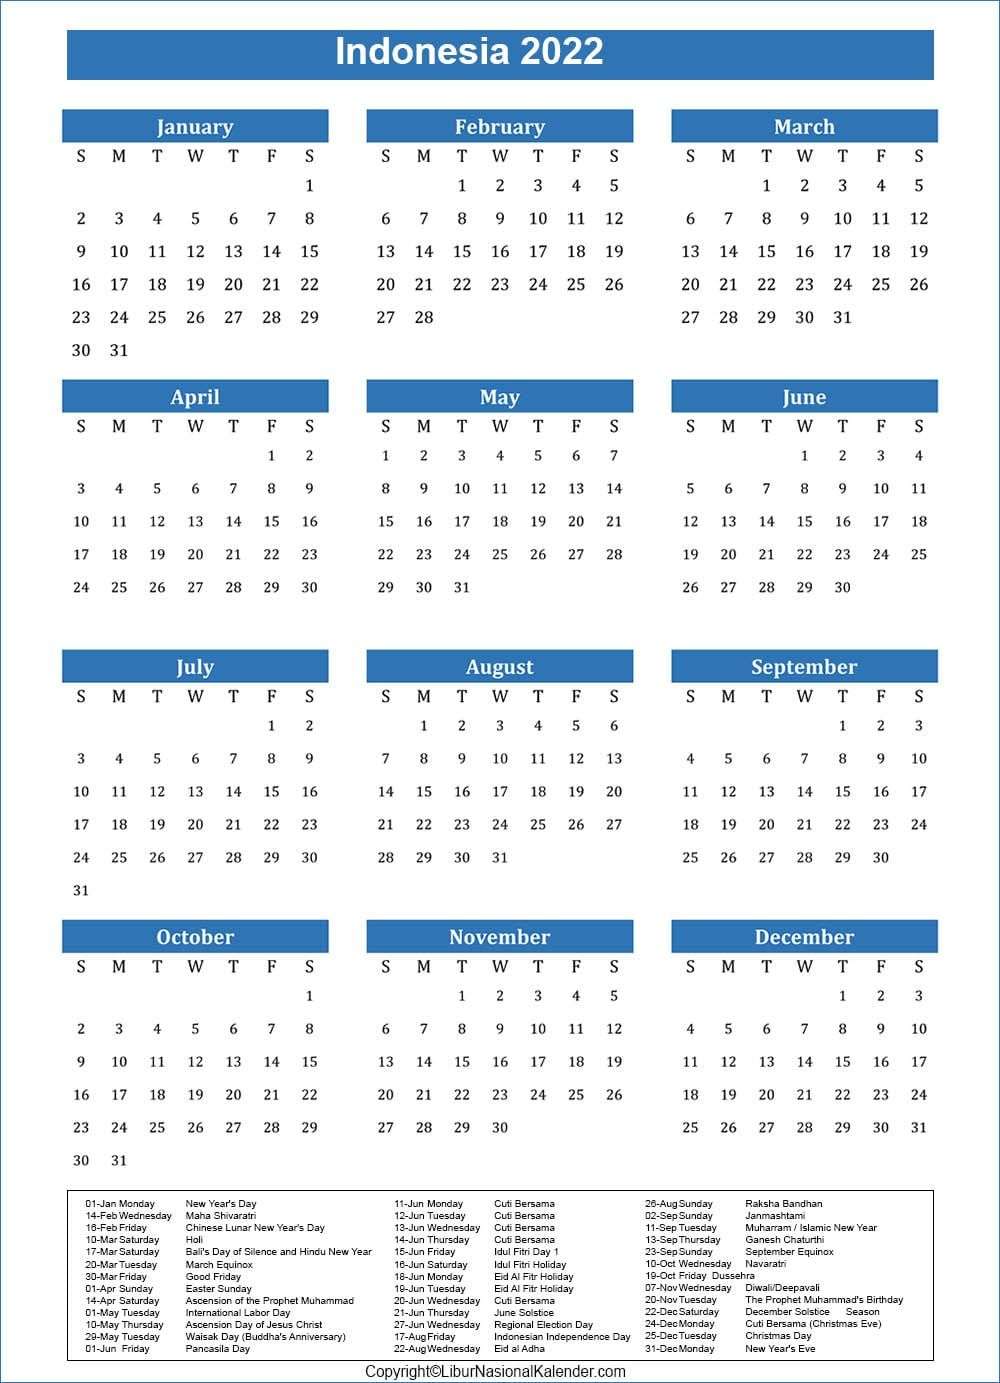 View Islamic Calendar 2022 March Images - All In Here